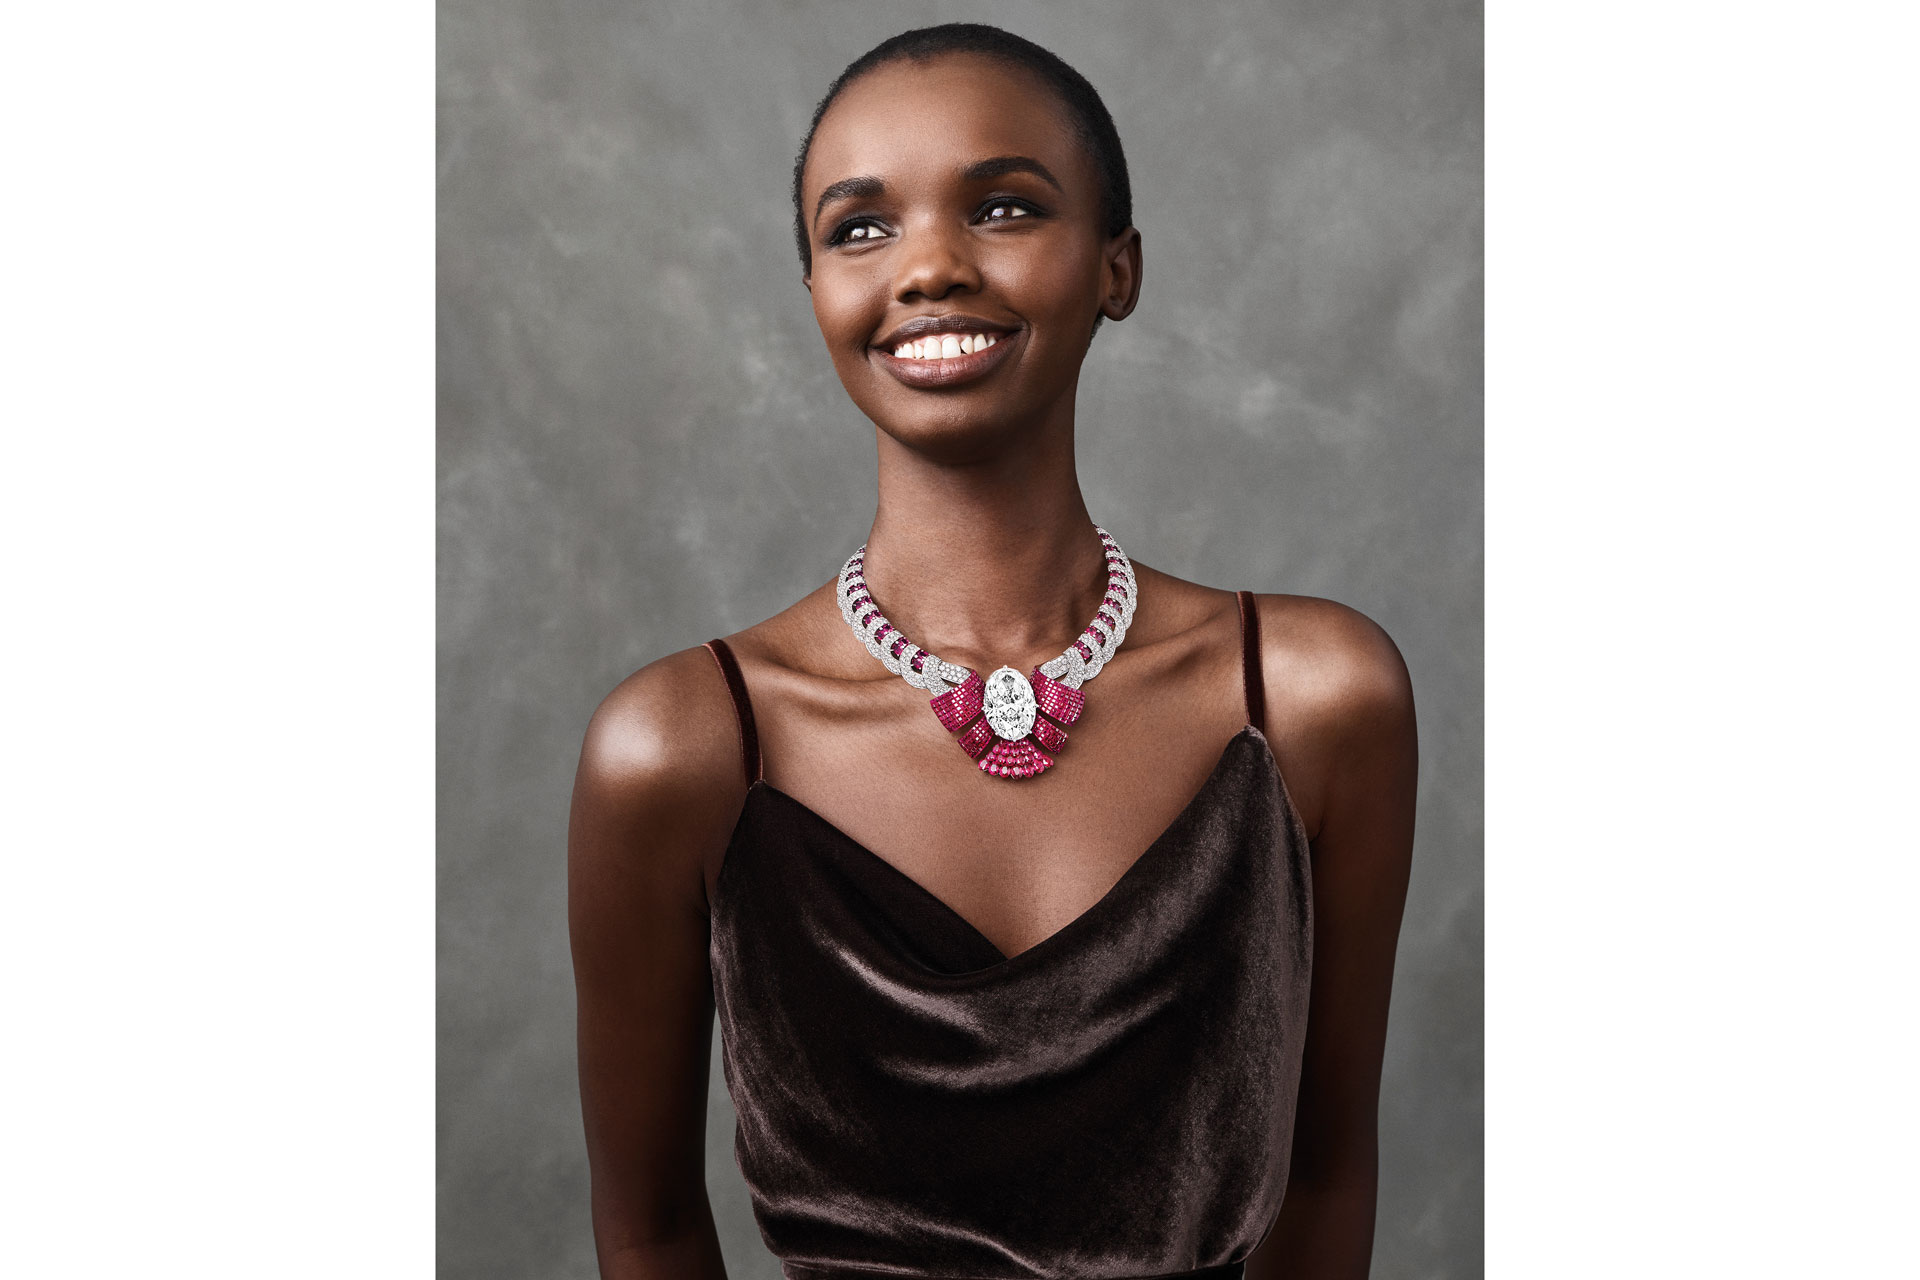 Van Cleef & Arpels Atours Mysterieux ruby necklace containing the largest diamond from the 910 carat rough,